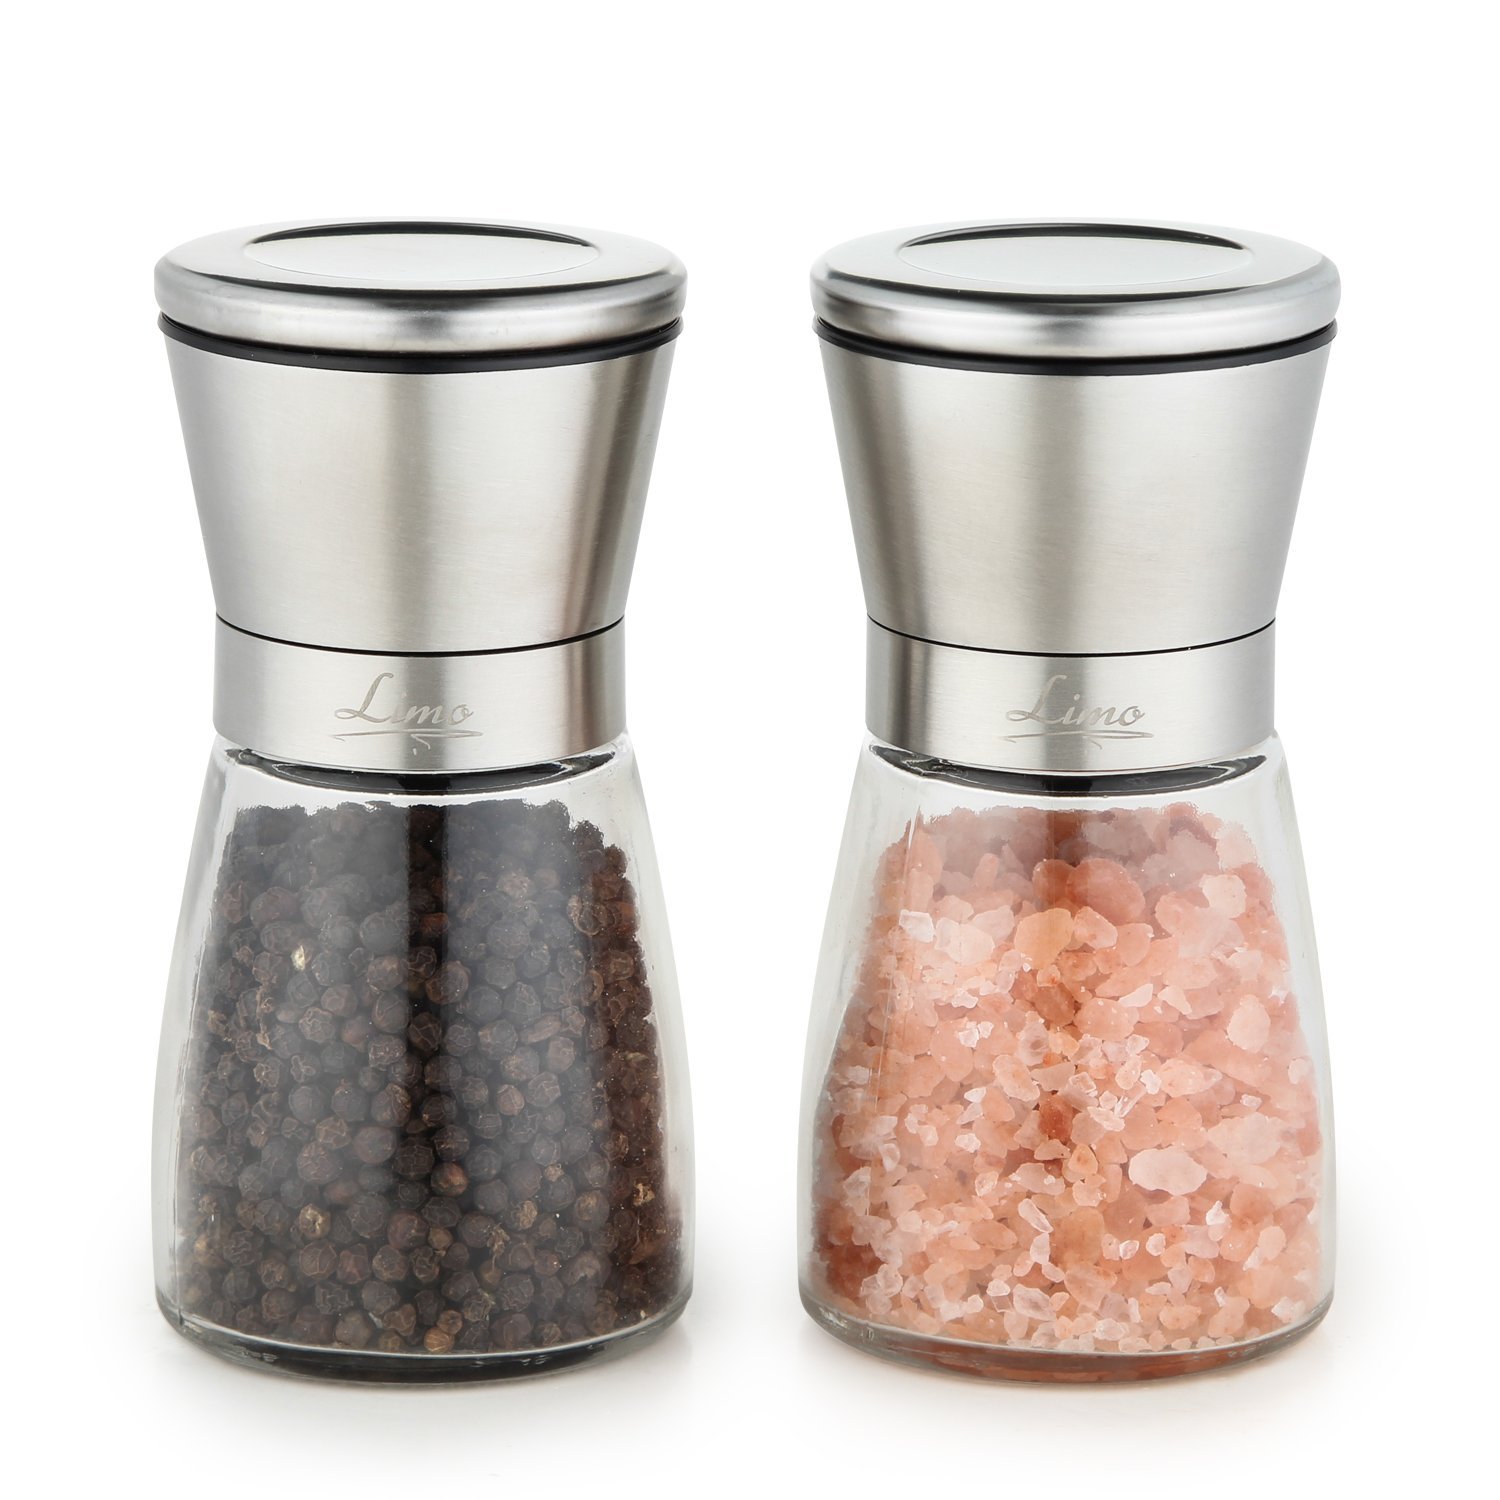 Limo Stainless Steel and Glass Body Salt and Pepper Grinder Set – Just $11.95!